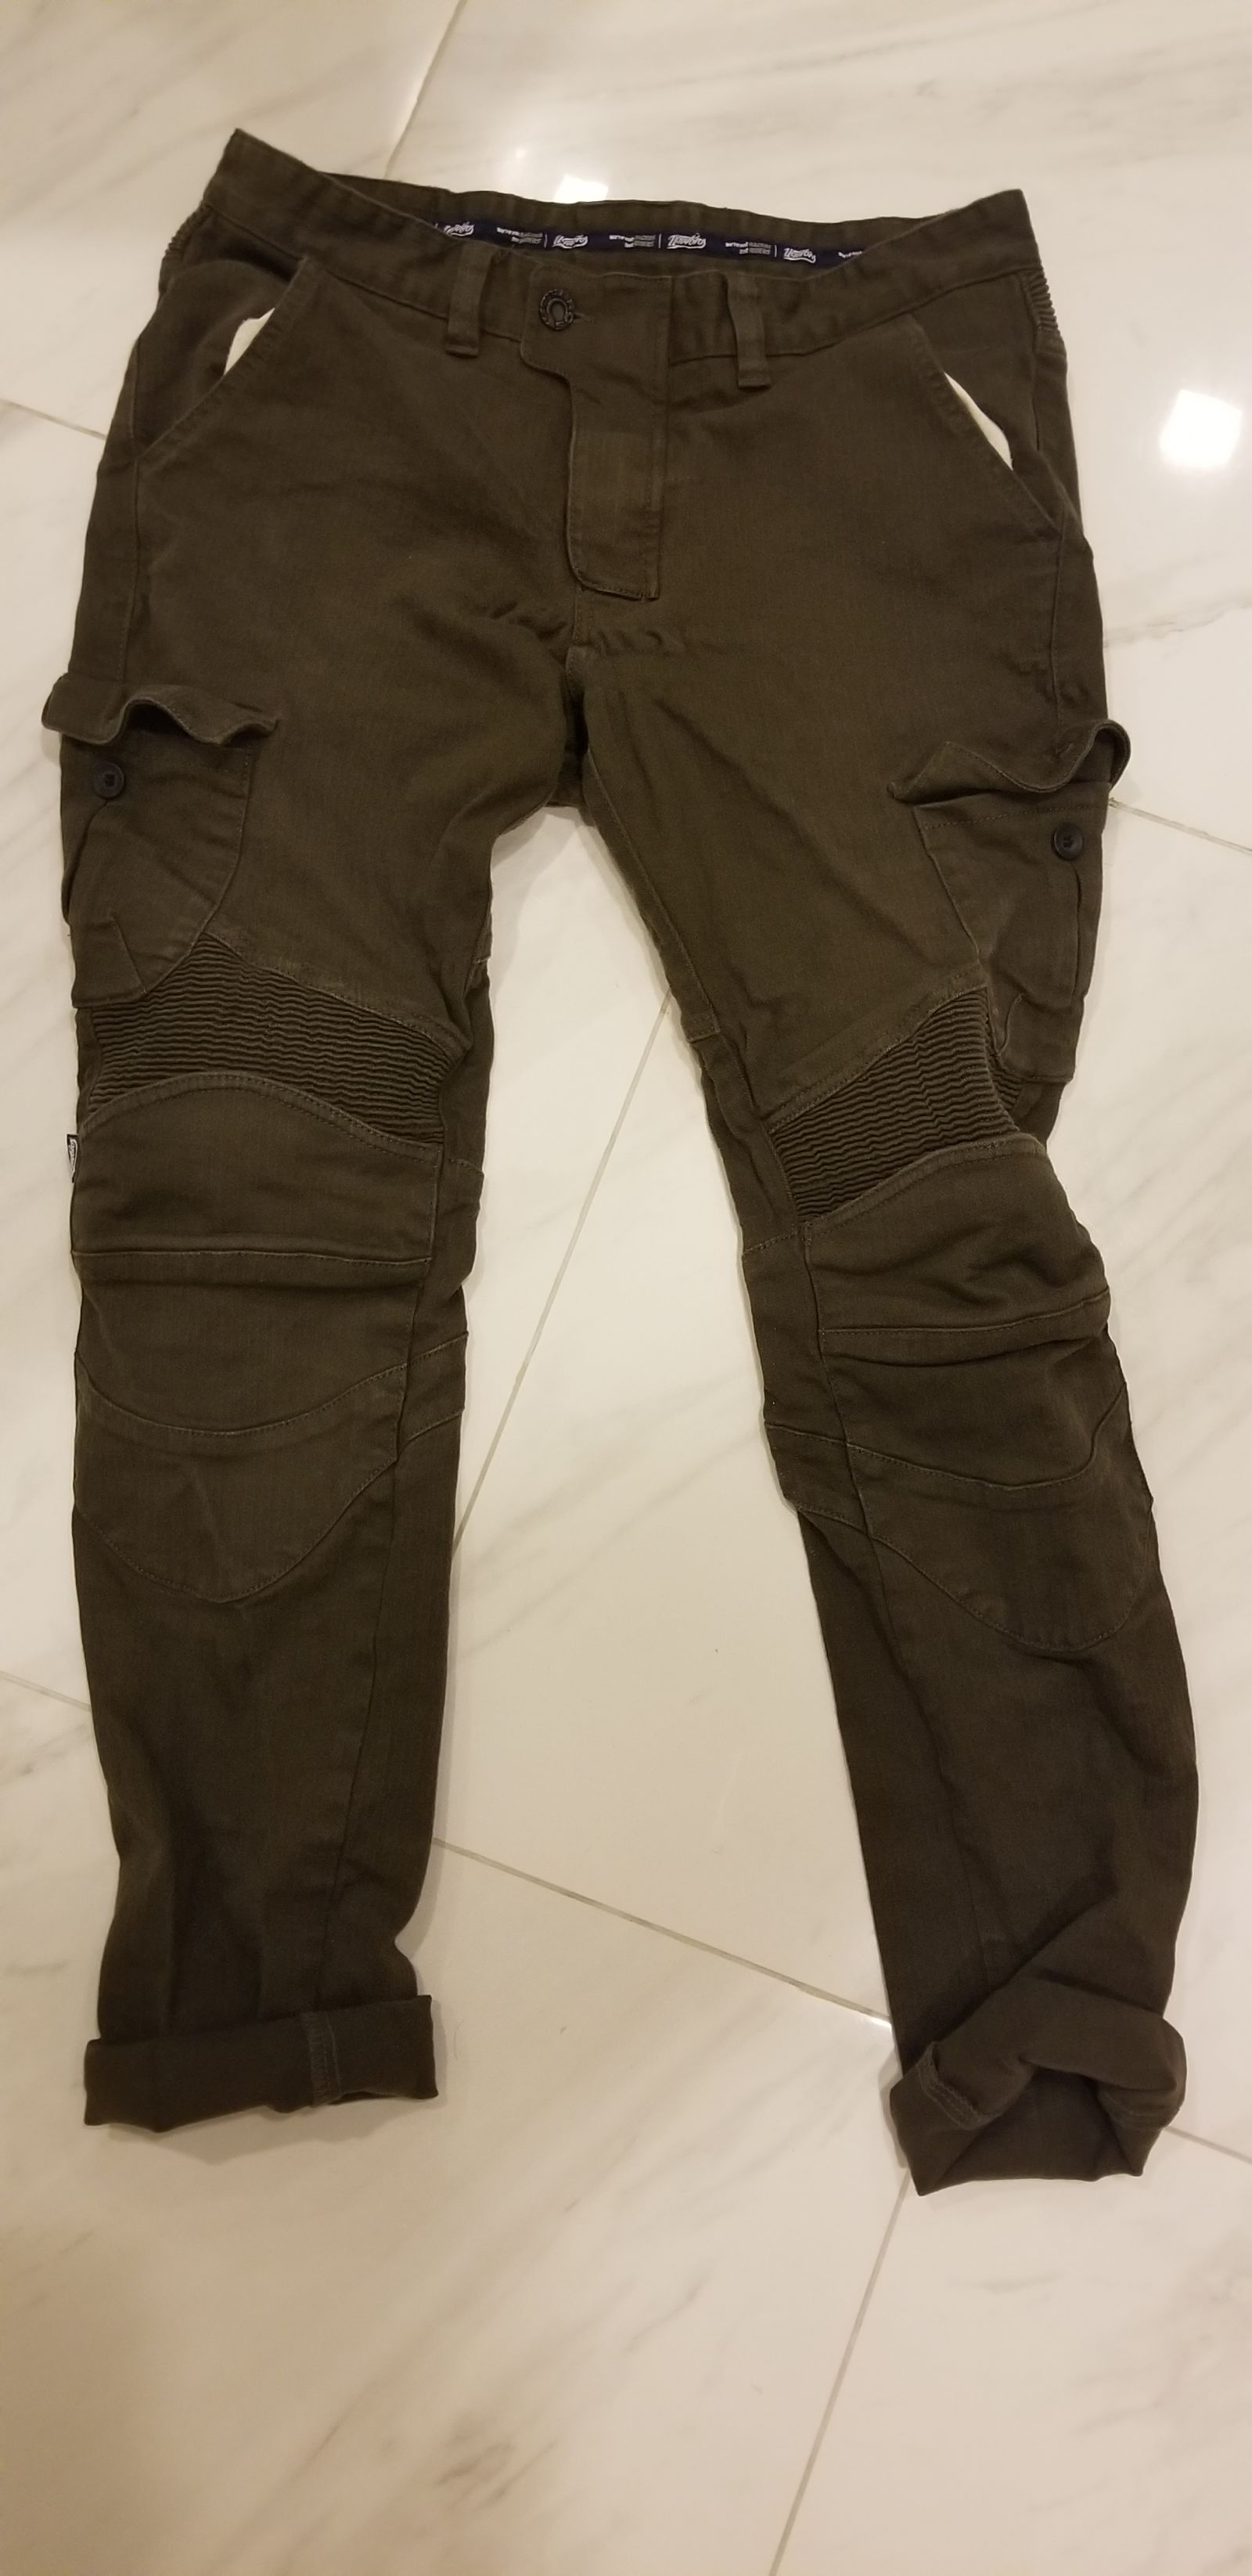 Illustration for article titled Motorcycle pants are the unsung hero of my travels - Uglybros review